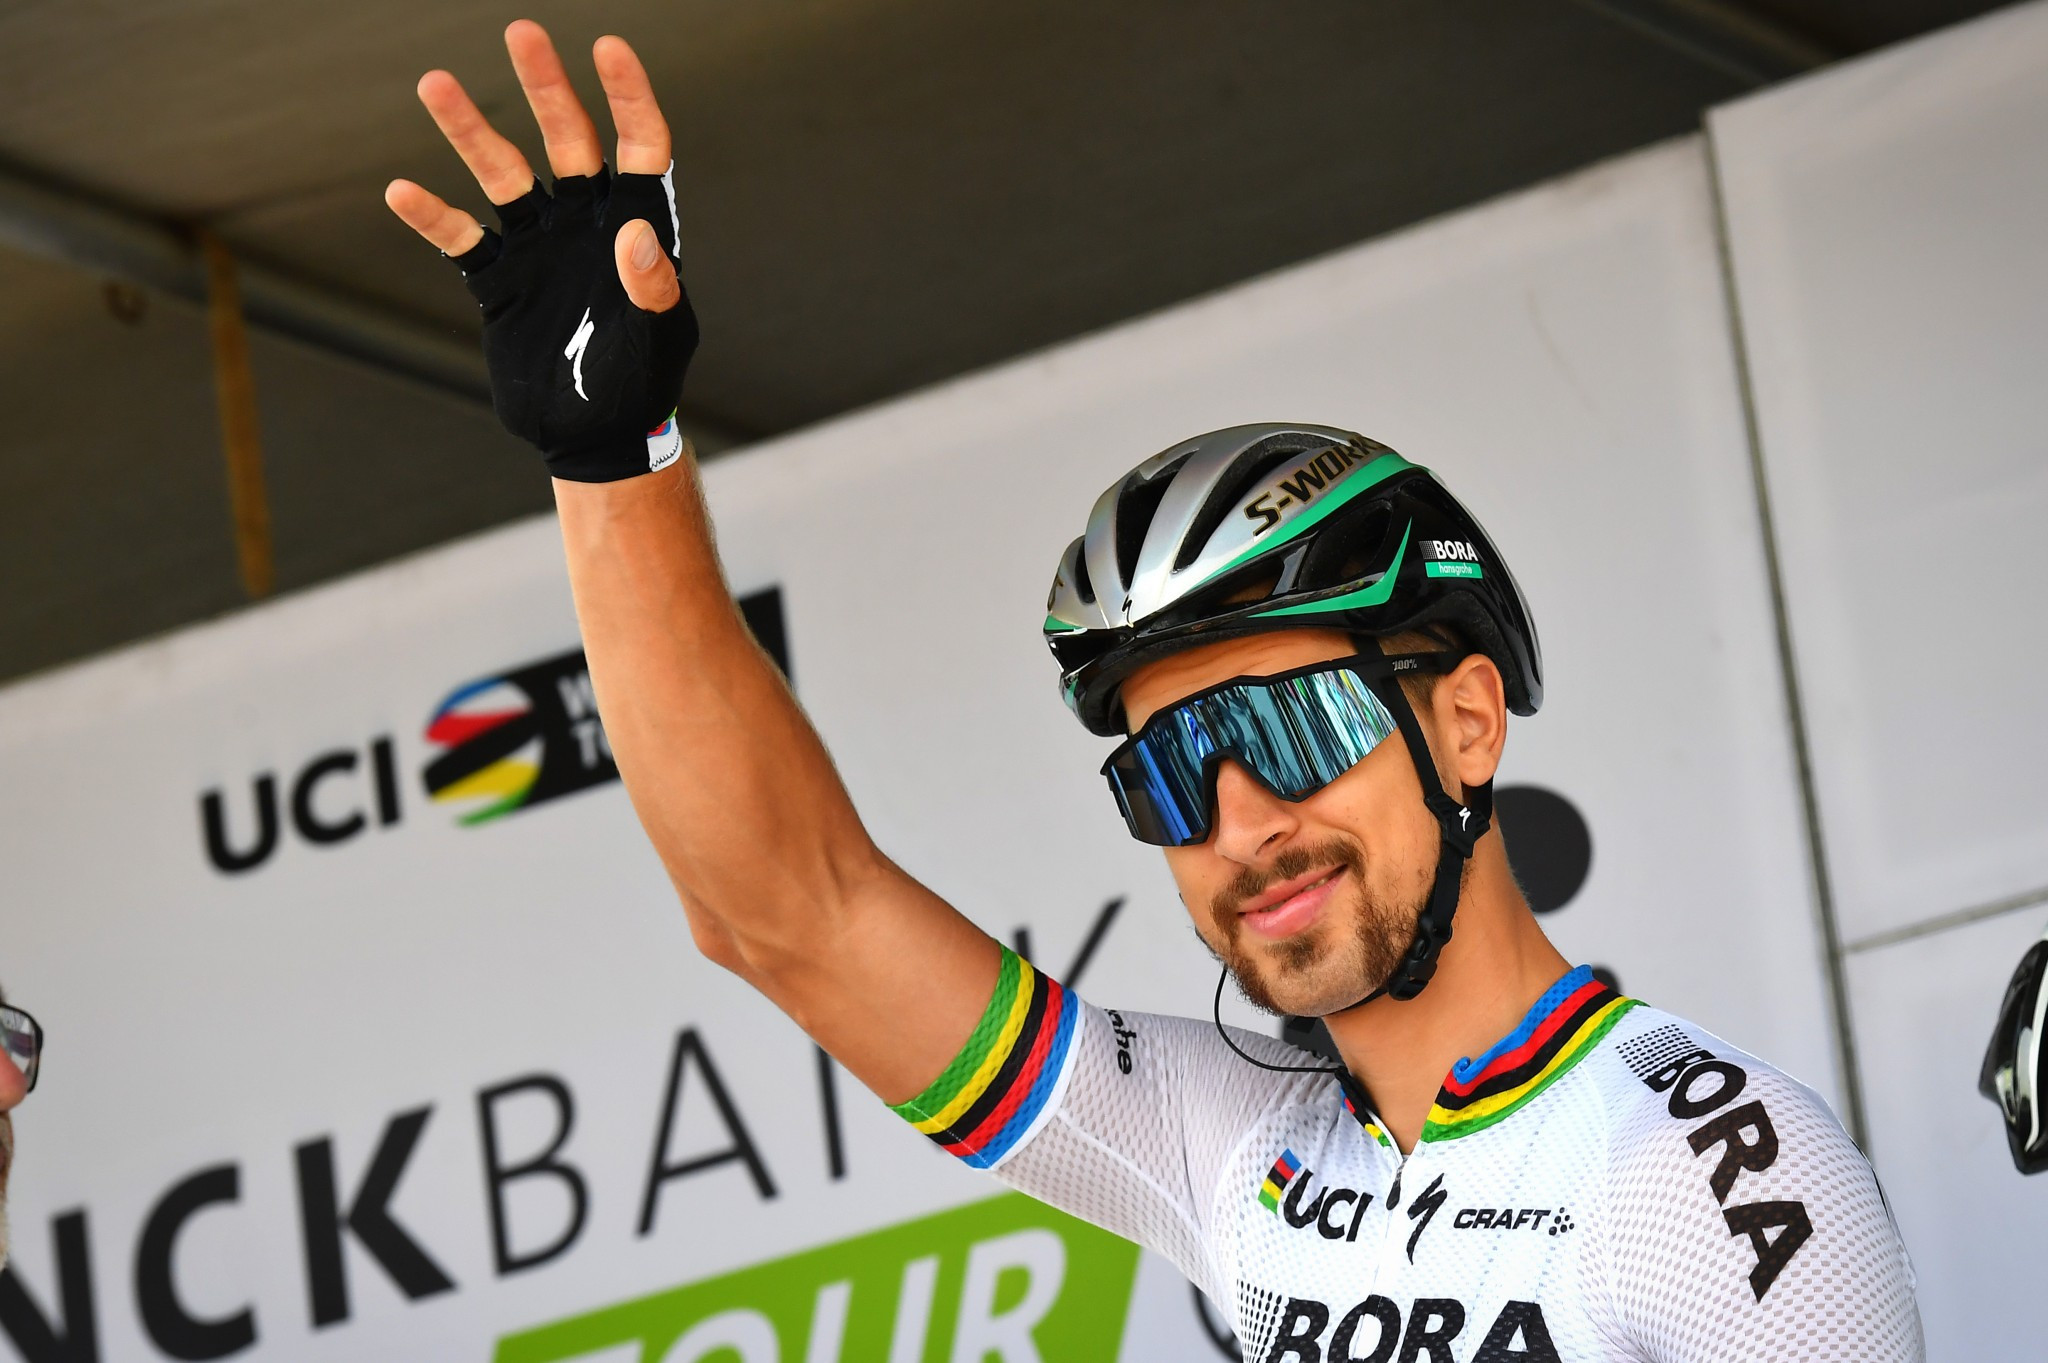 Slovakia's Peter Sagan will hope to earn an unprecedented third straight road race title on September 24 ©Getty Images